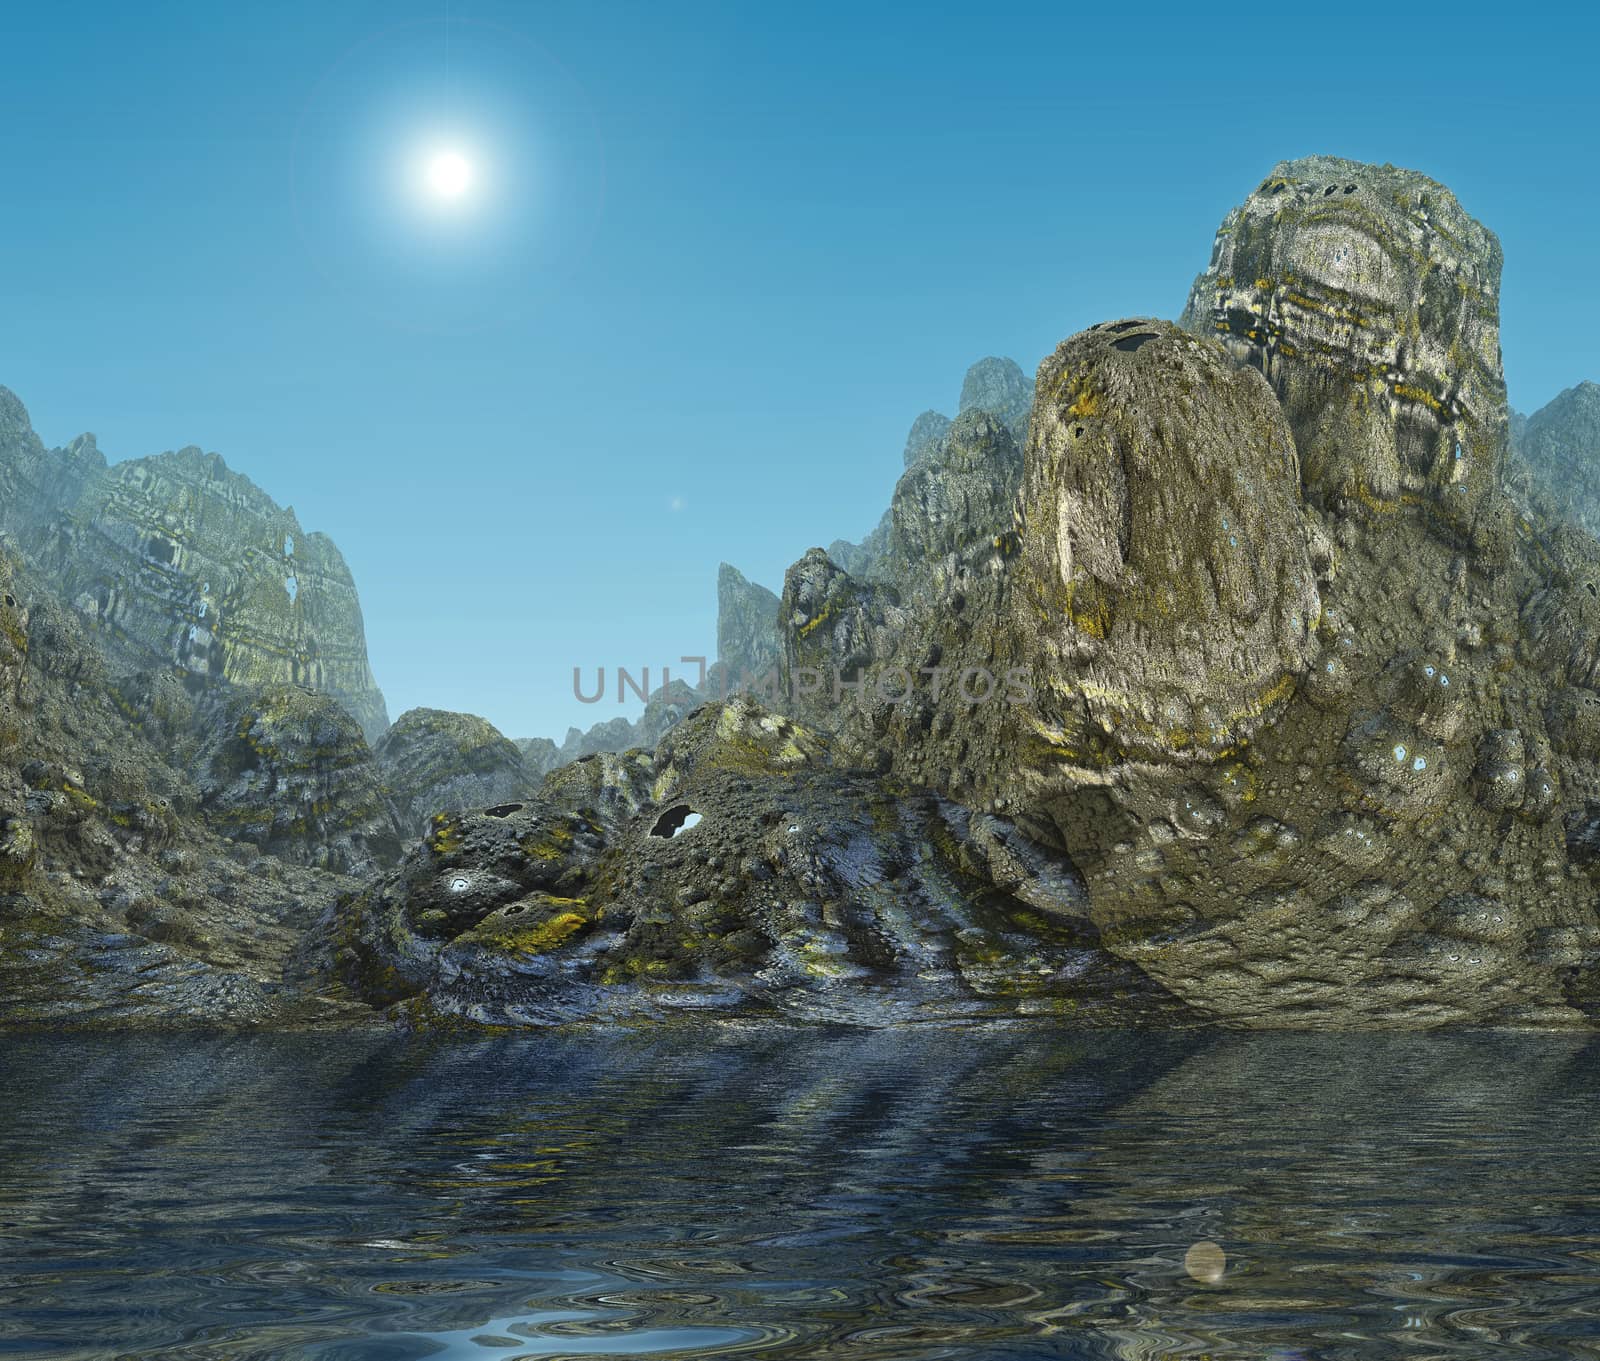 Computer rendered virtual scenery for art and entertainment